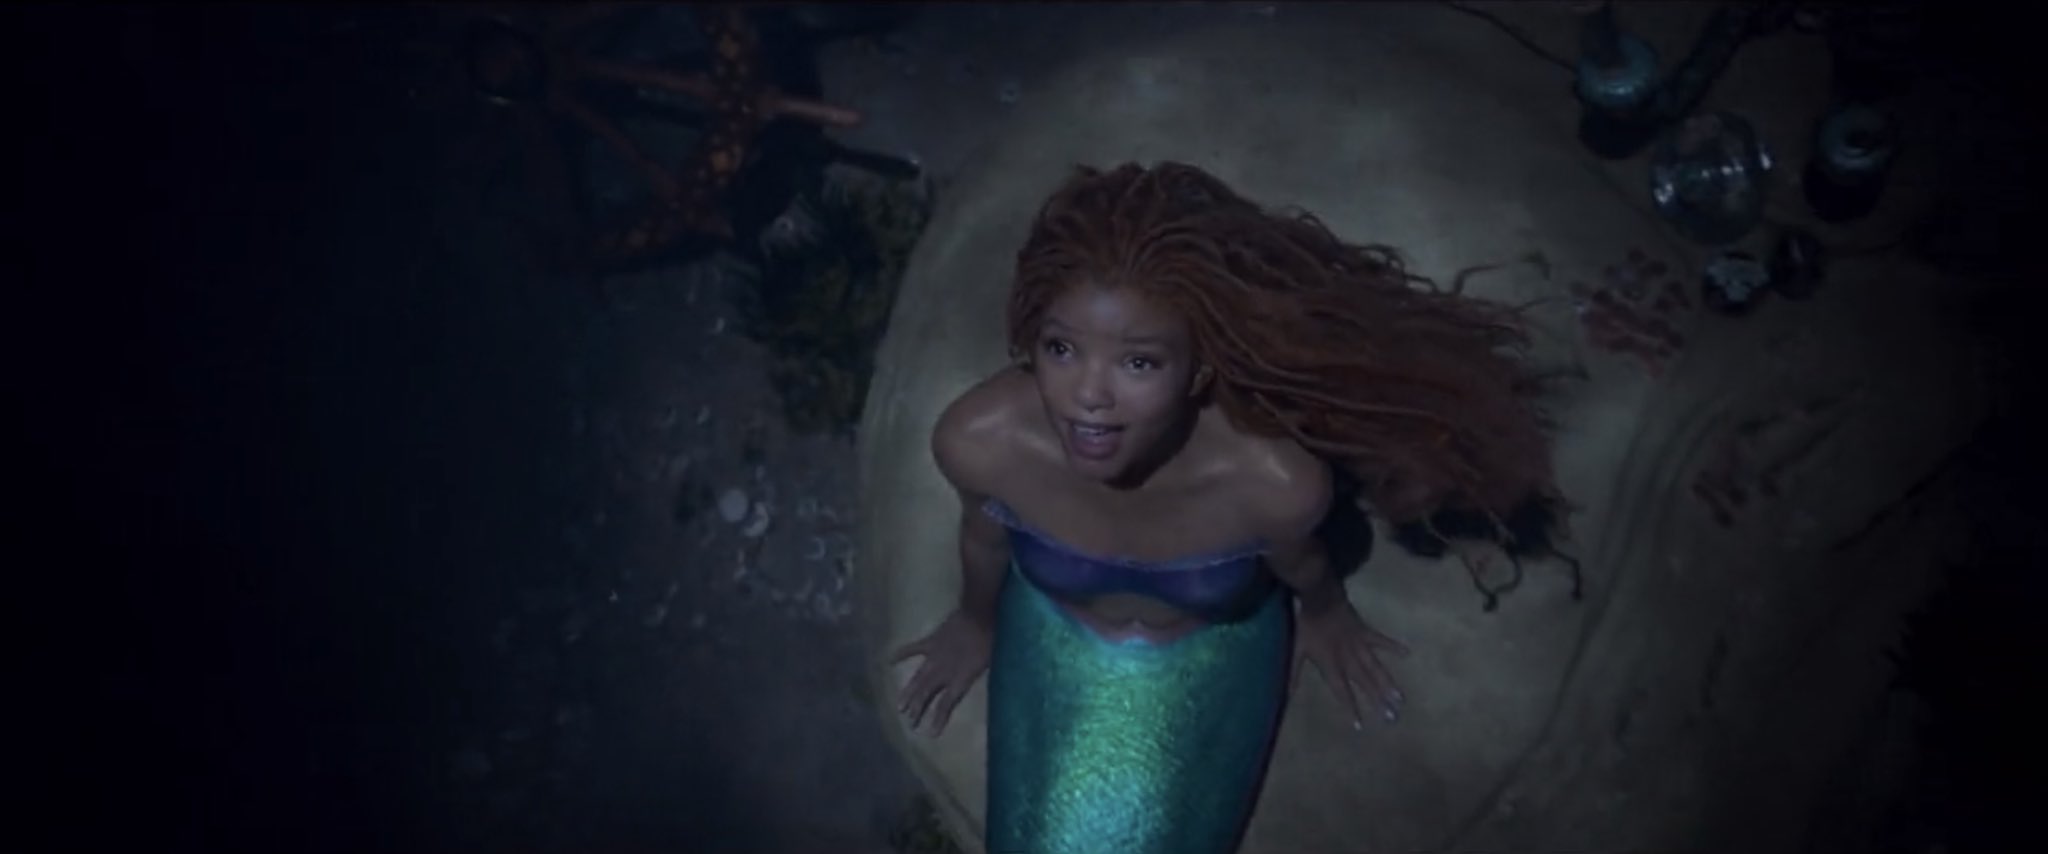 The new Ariel from The Little Mermaid